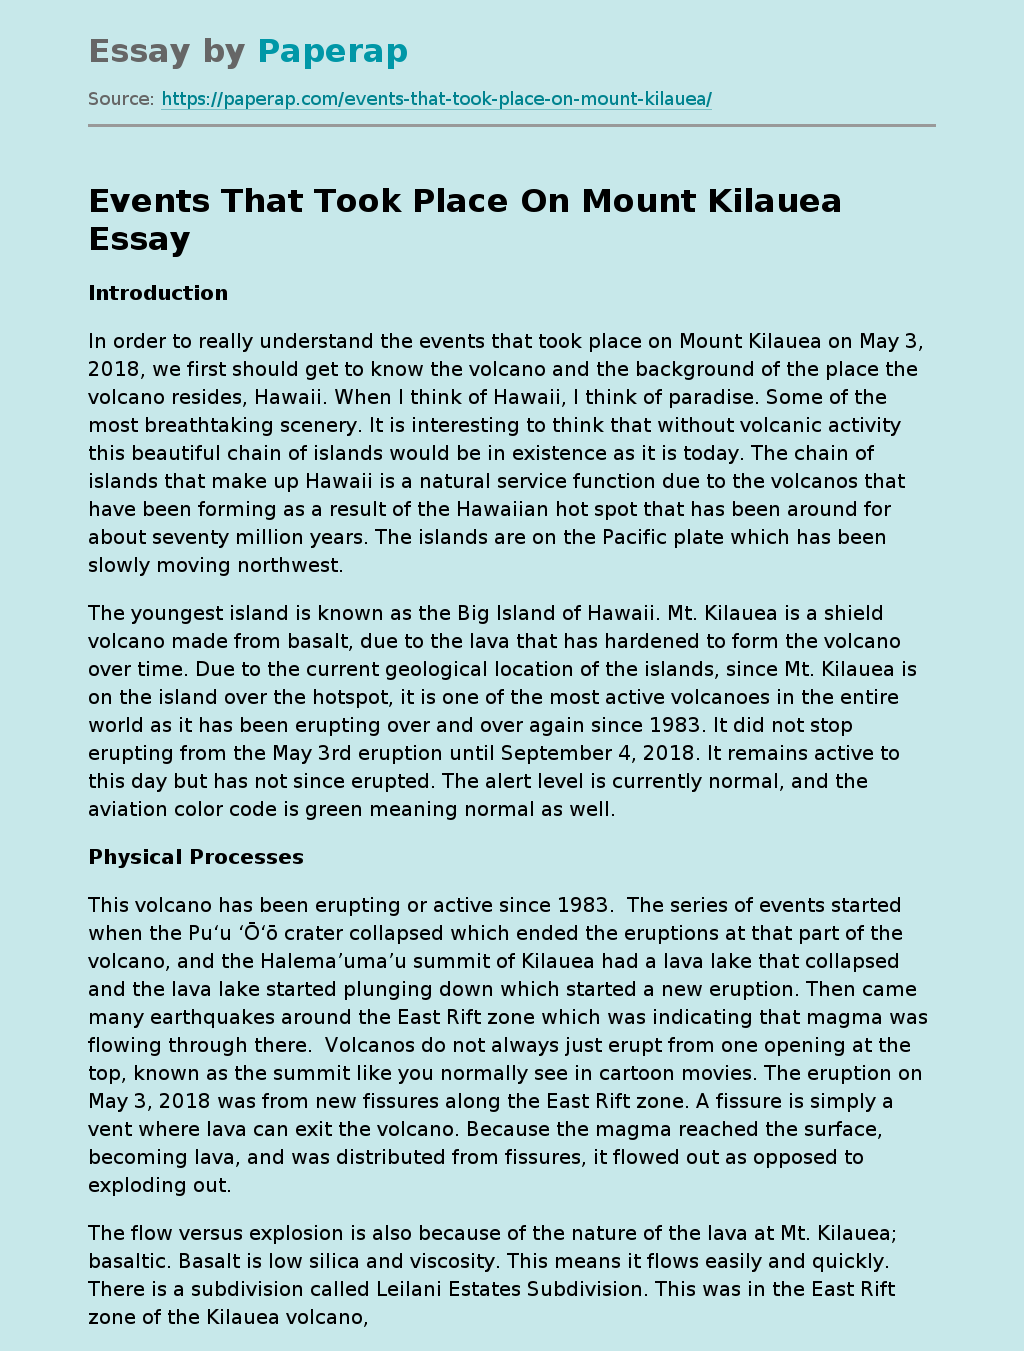 Events That Took Place On Mount Kilauea